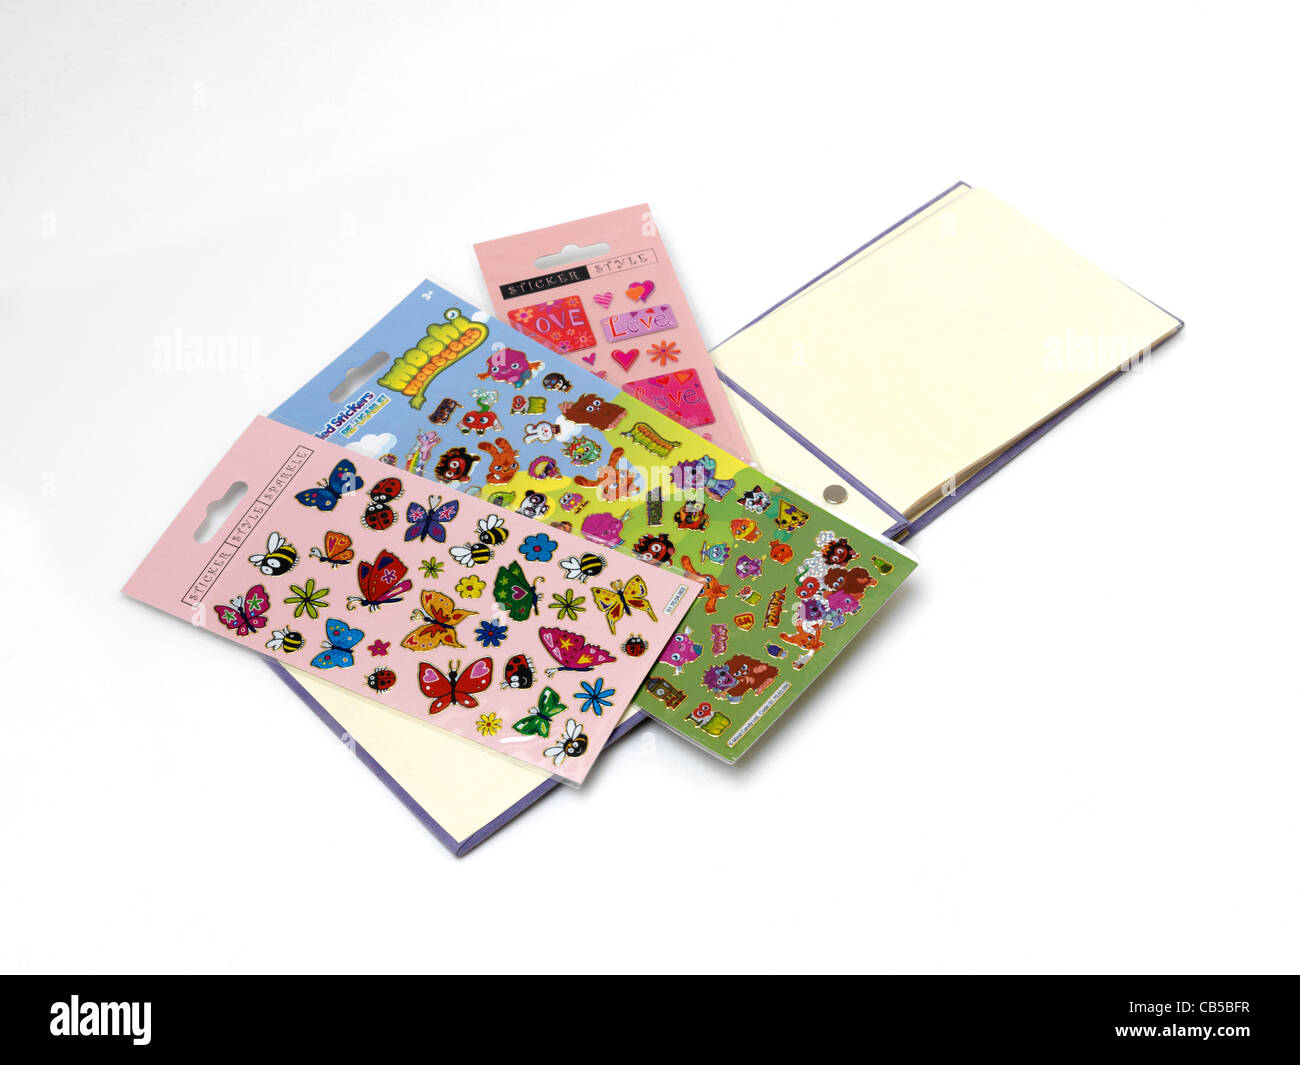 Butterflies, Love And Moshi Monsters Stickers And Sticker Album Stock Photo